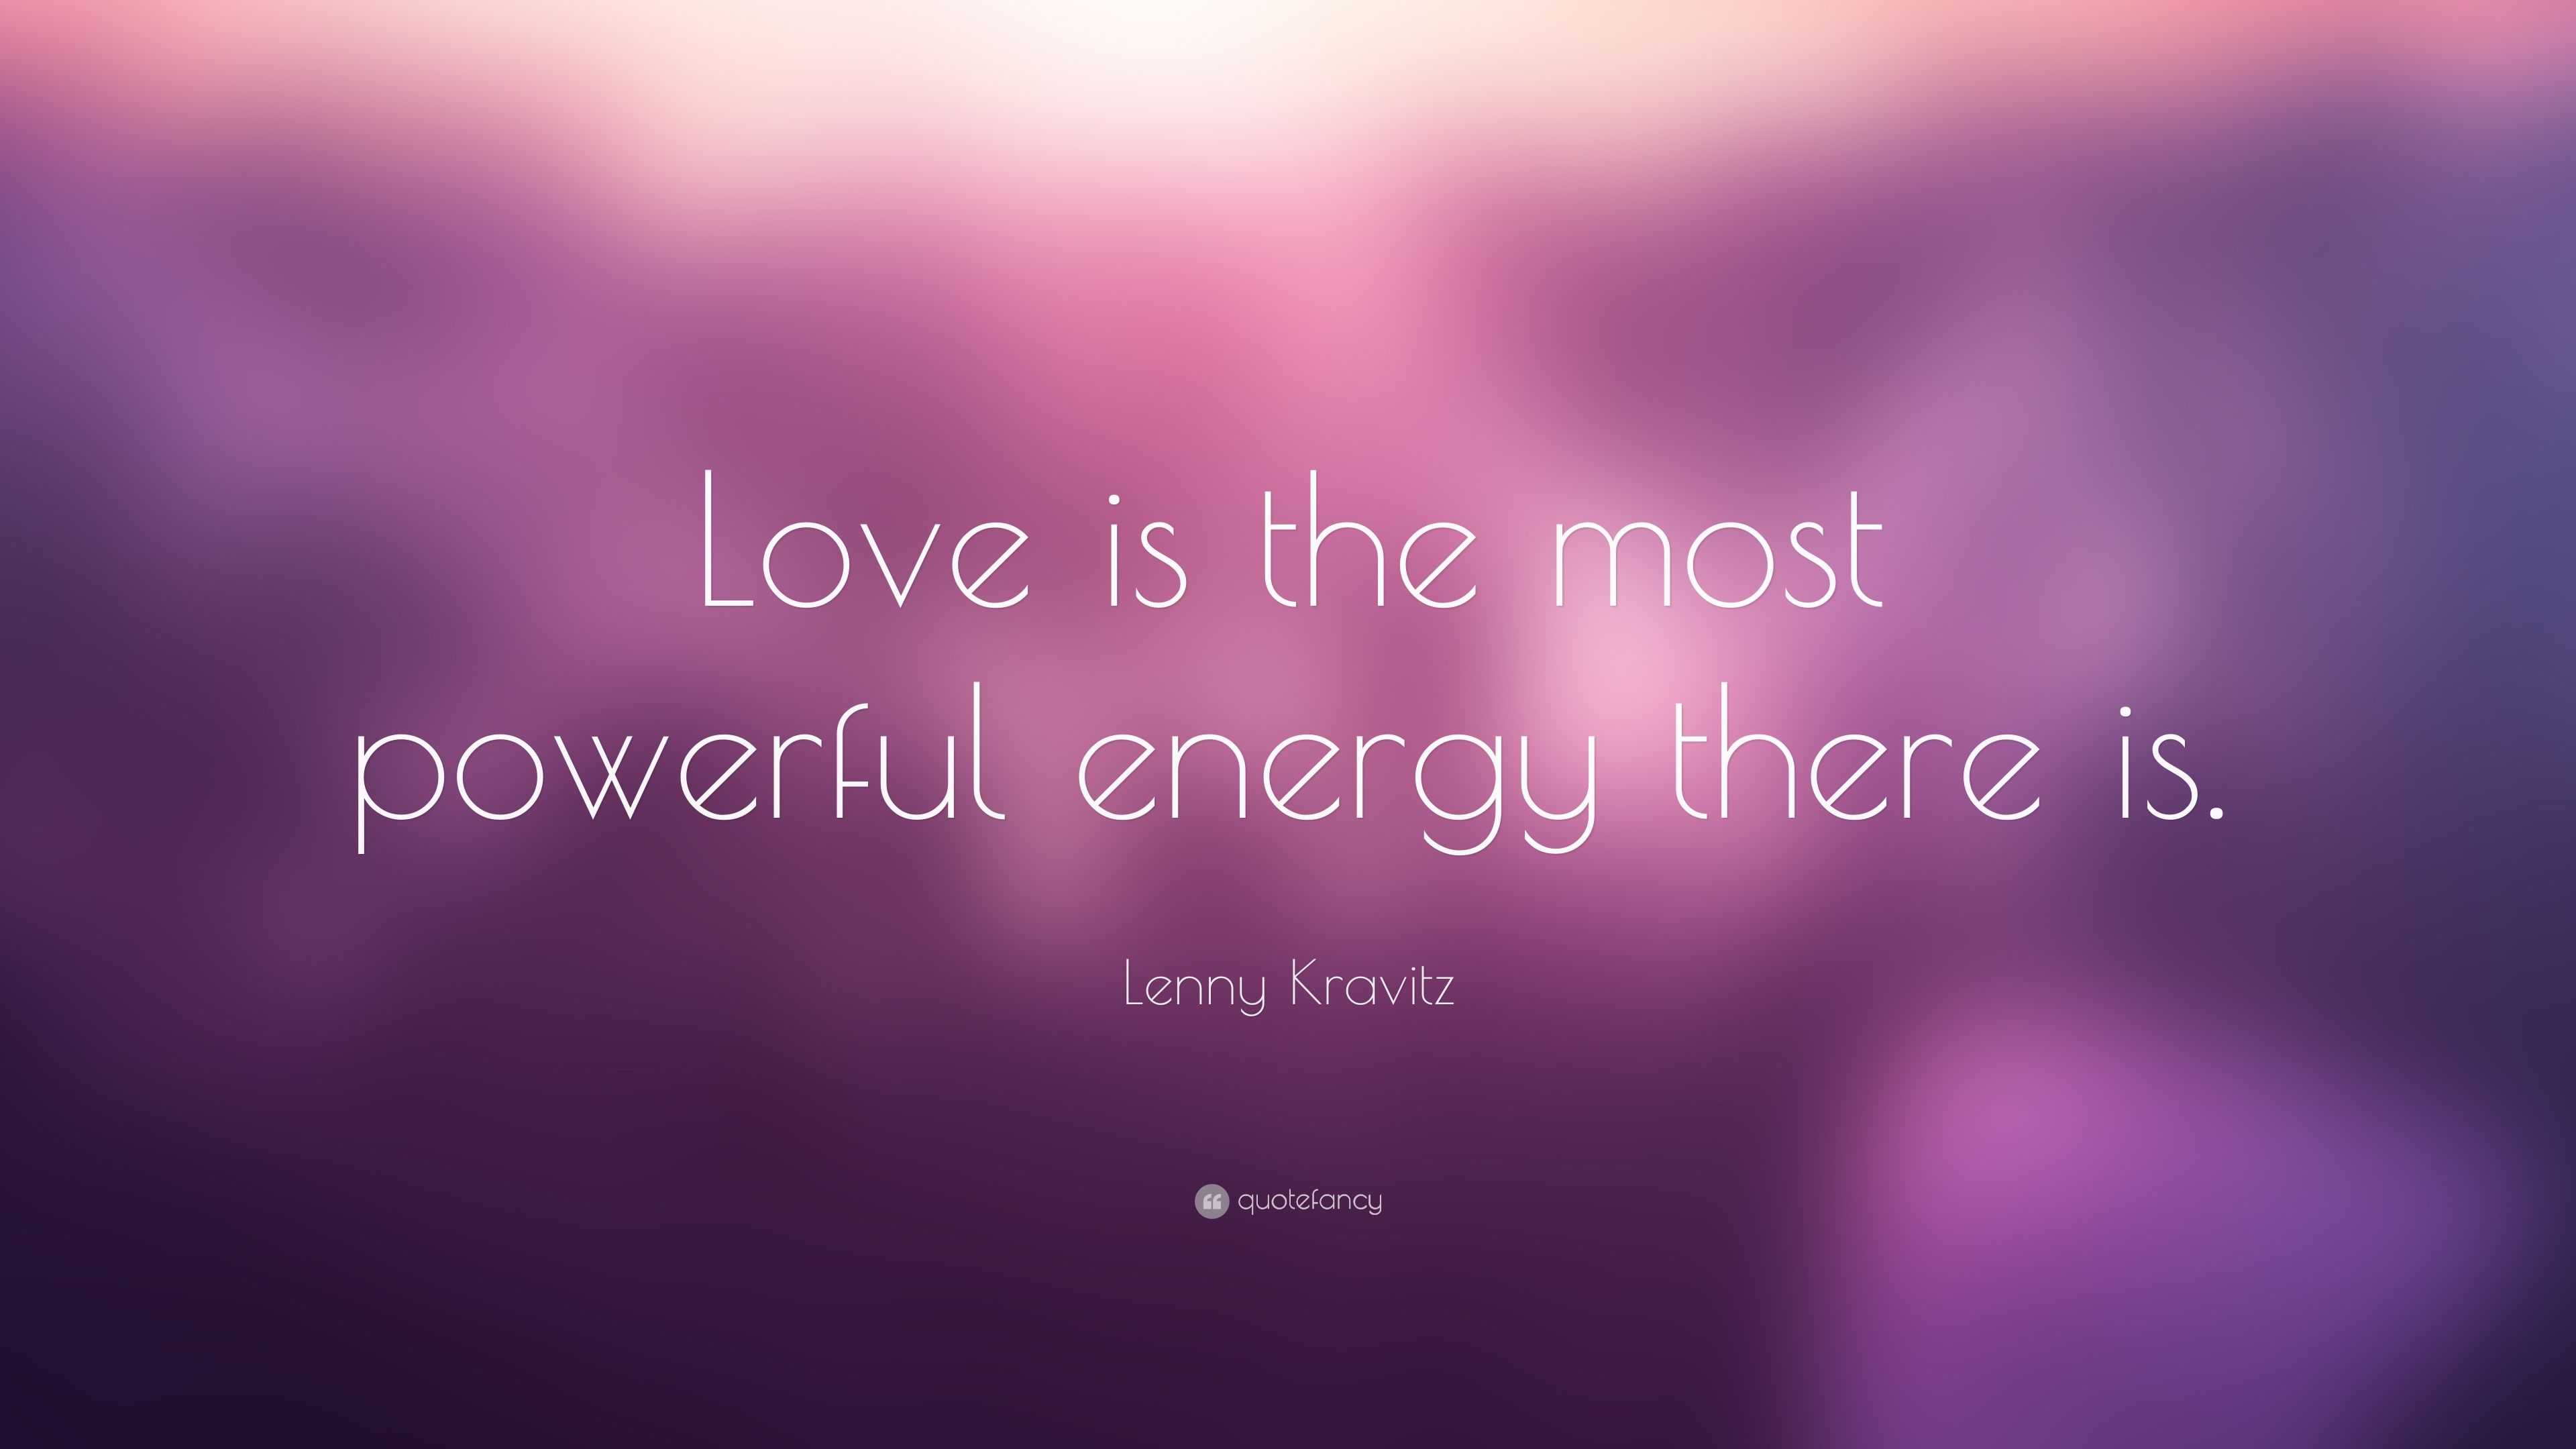 Lenny Kravitz Quote: “Love is the most powerful energy there is.”